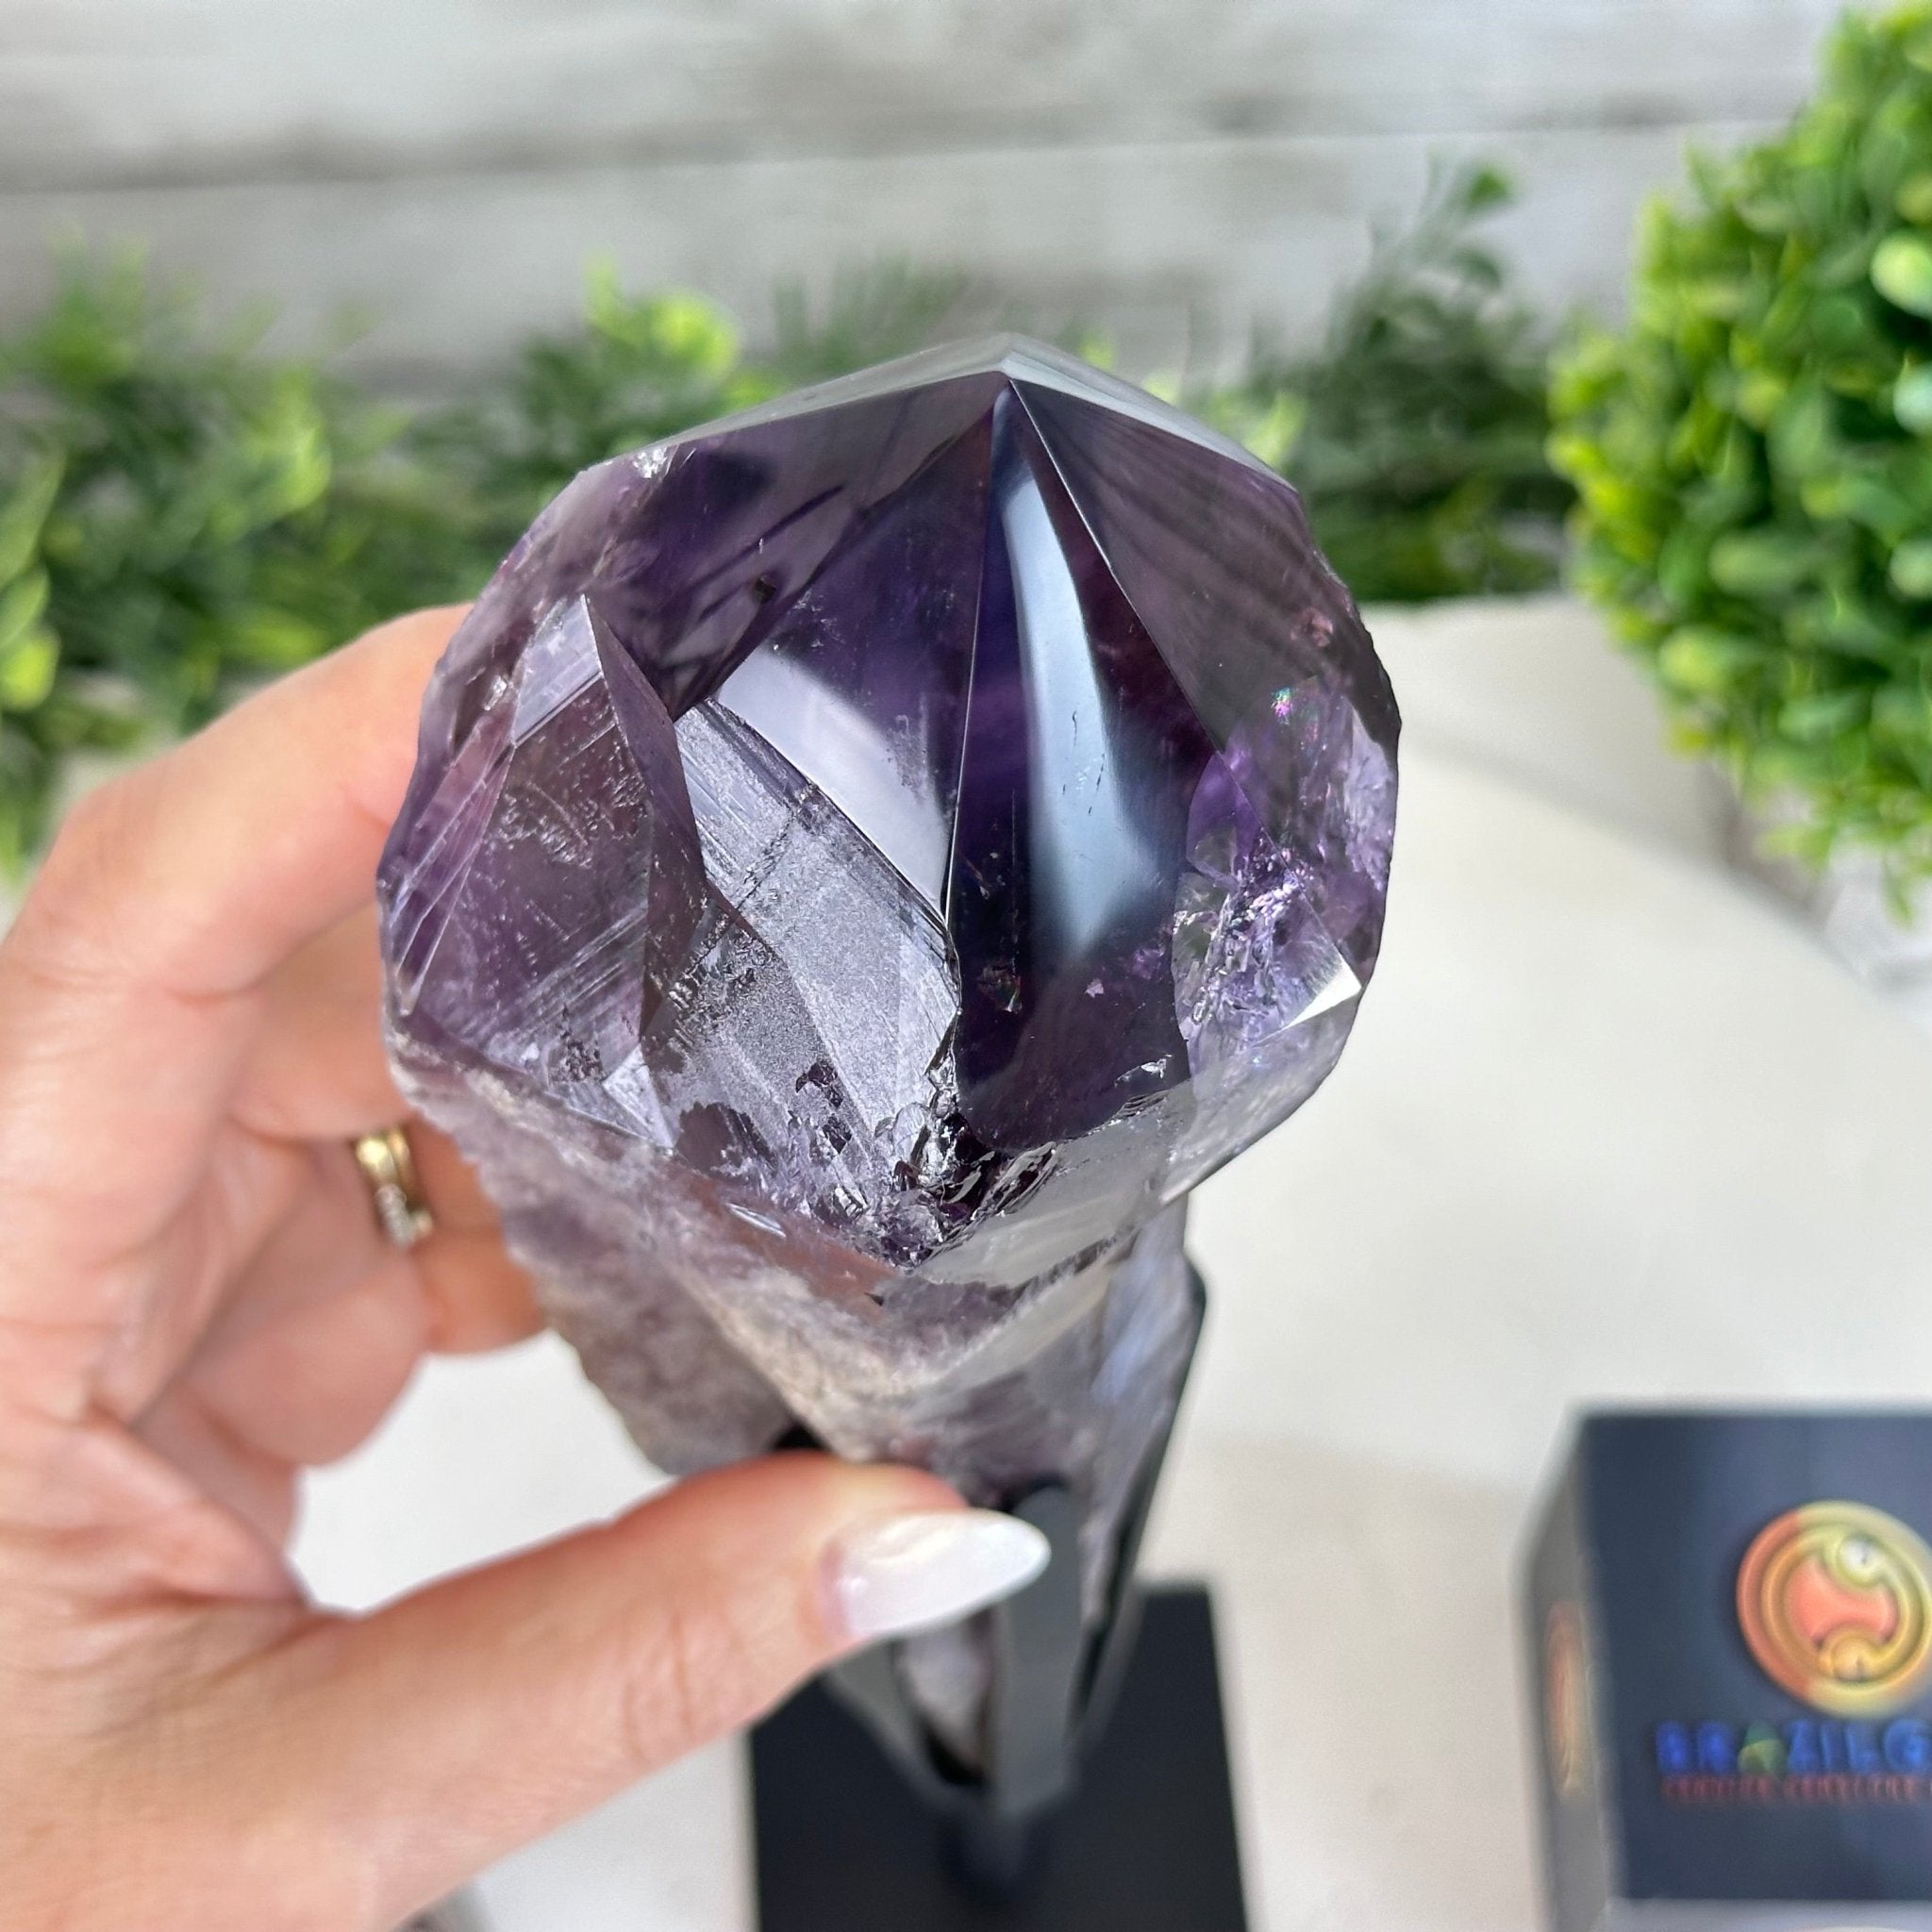 Super Quality Amethyst Wand on a Metal Stand, 2.6 lbs & 13.4" Tall #3123AM-012 - Brazil GemsBrazil GemsSuper Quality Amethyst Wand on a Metal Stand, 2.6 lbs & 13.4" Tall #3123AM-012Clusters on Fixed Bases3123AM-012